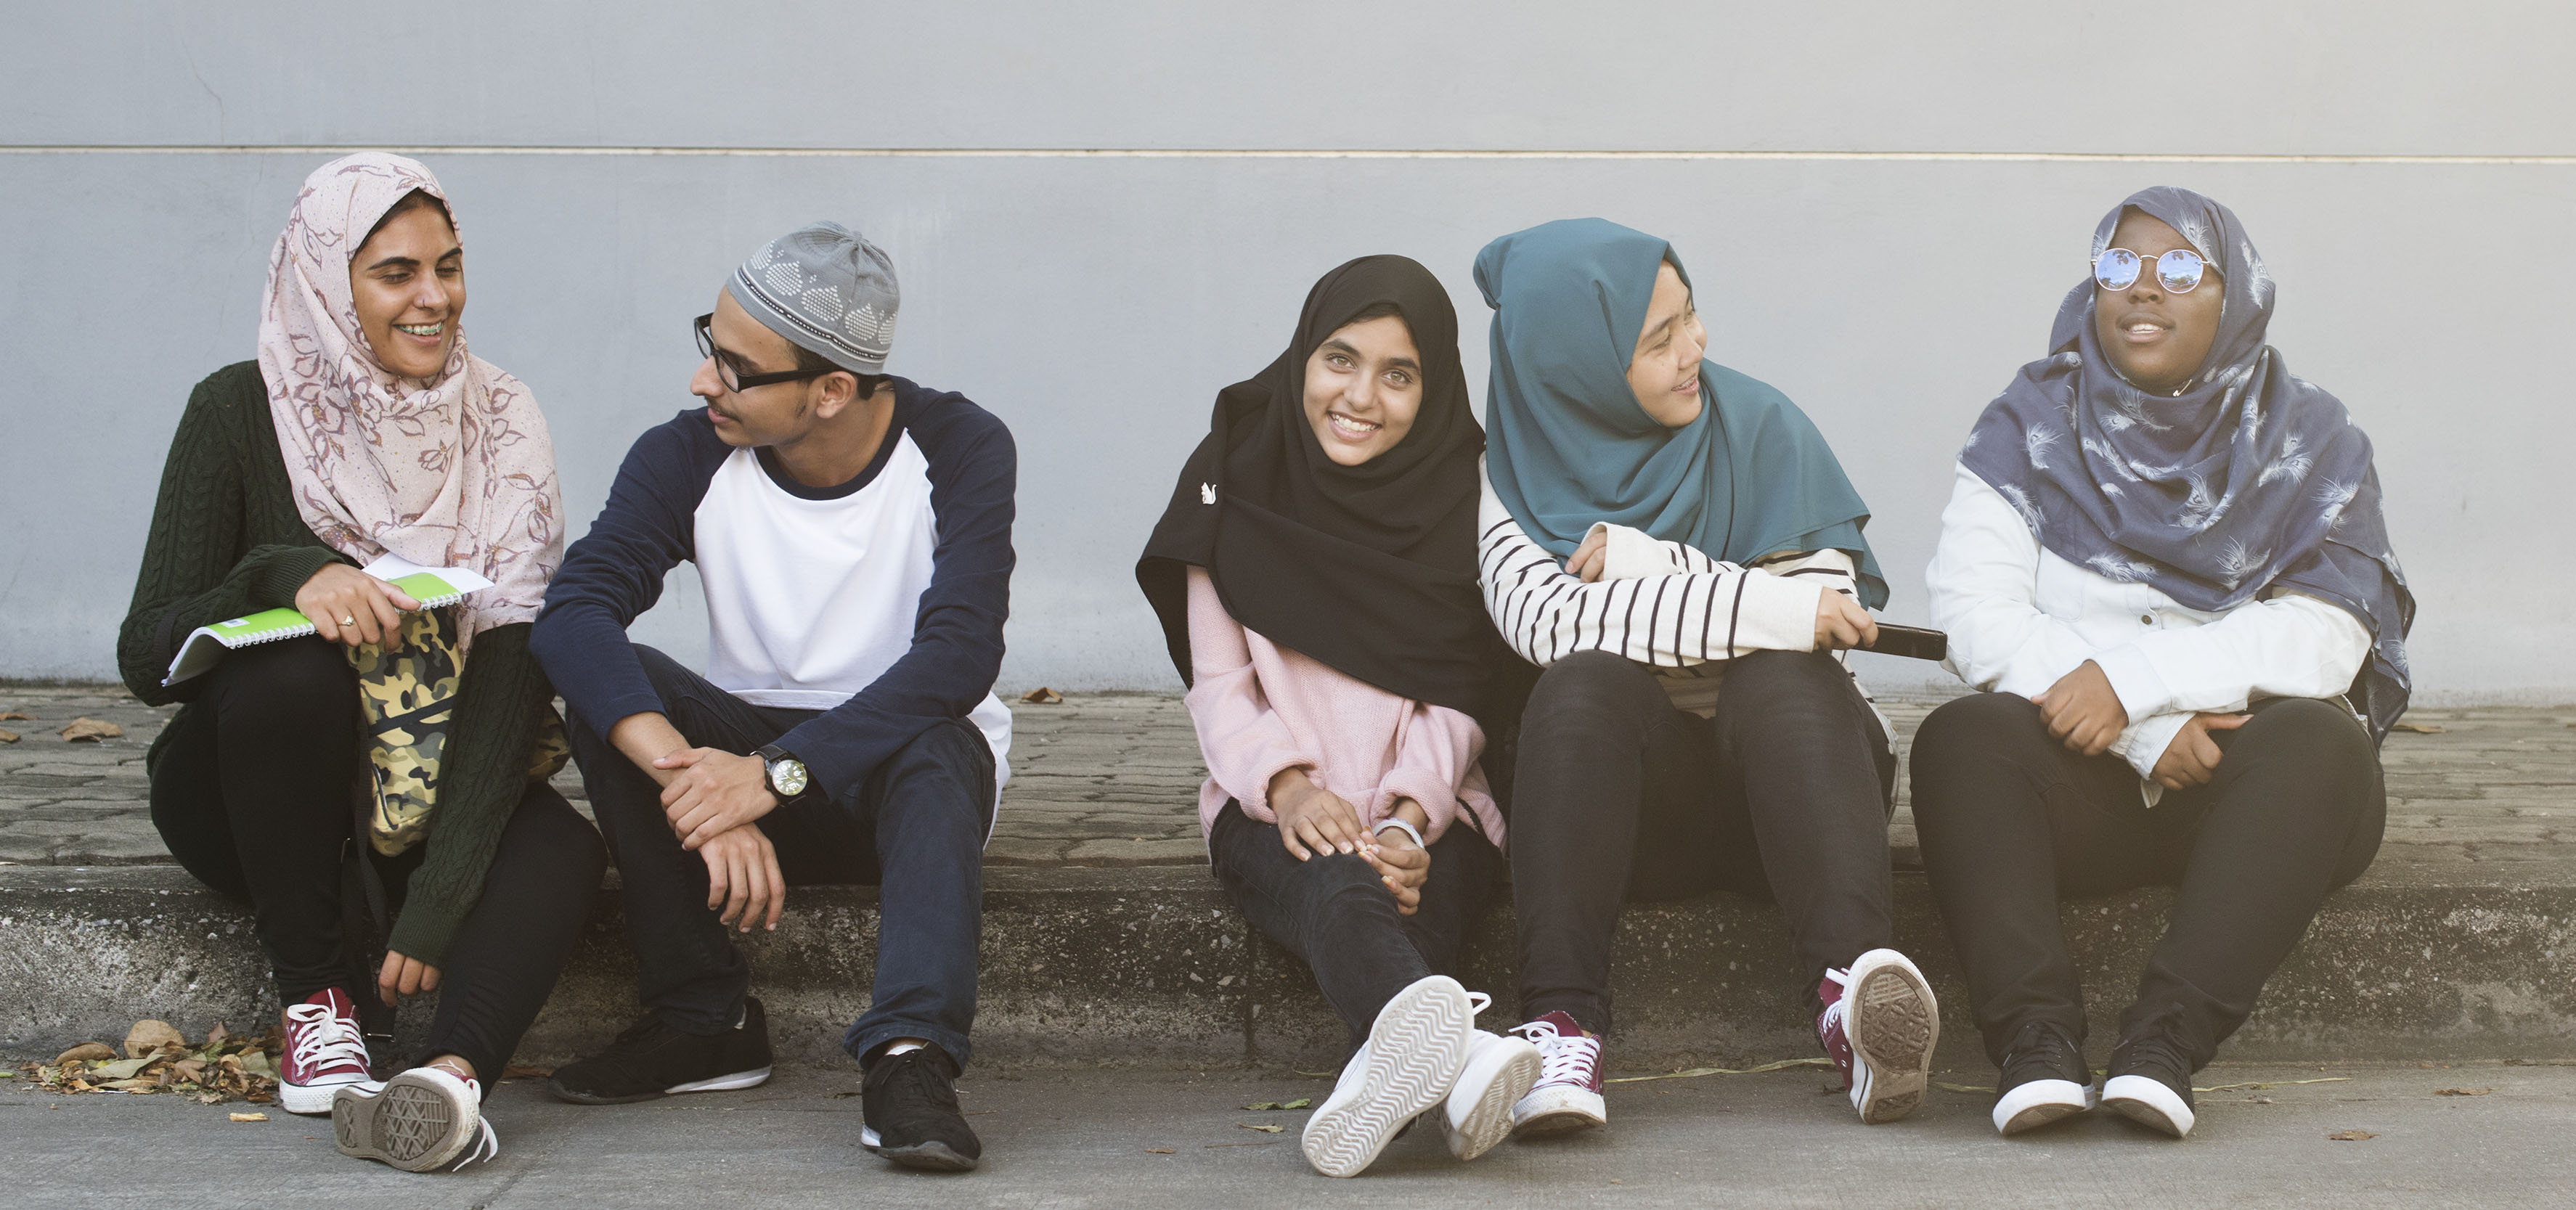 Xxx Video Musalman Ki Hd - 11 Ways to Build modesty in Young Muslims | SoundVision.com